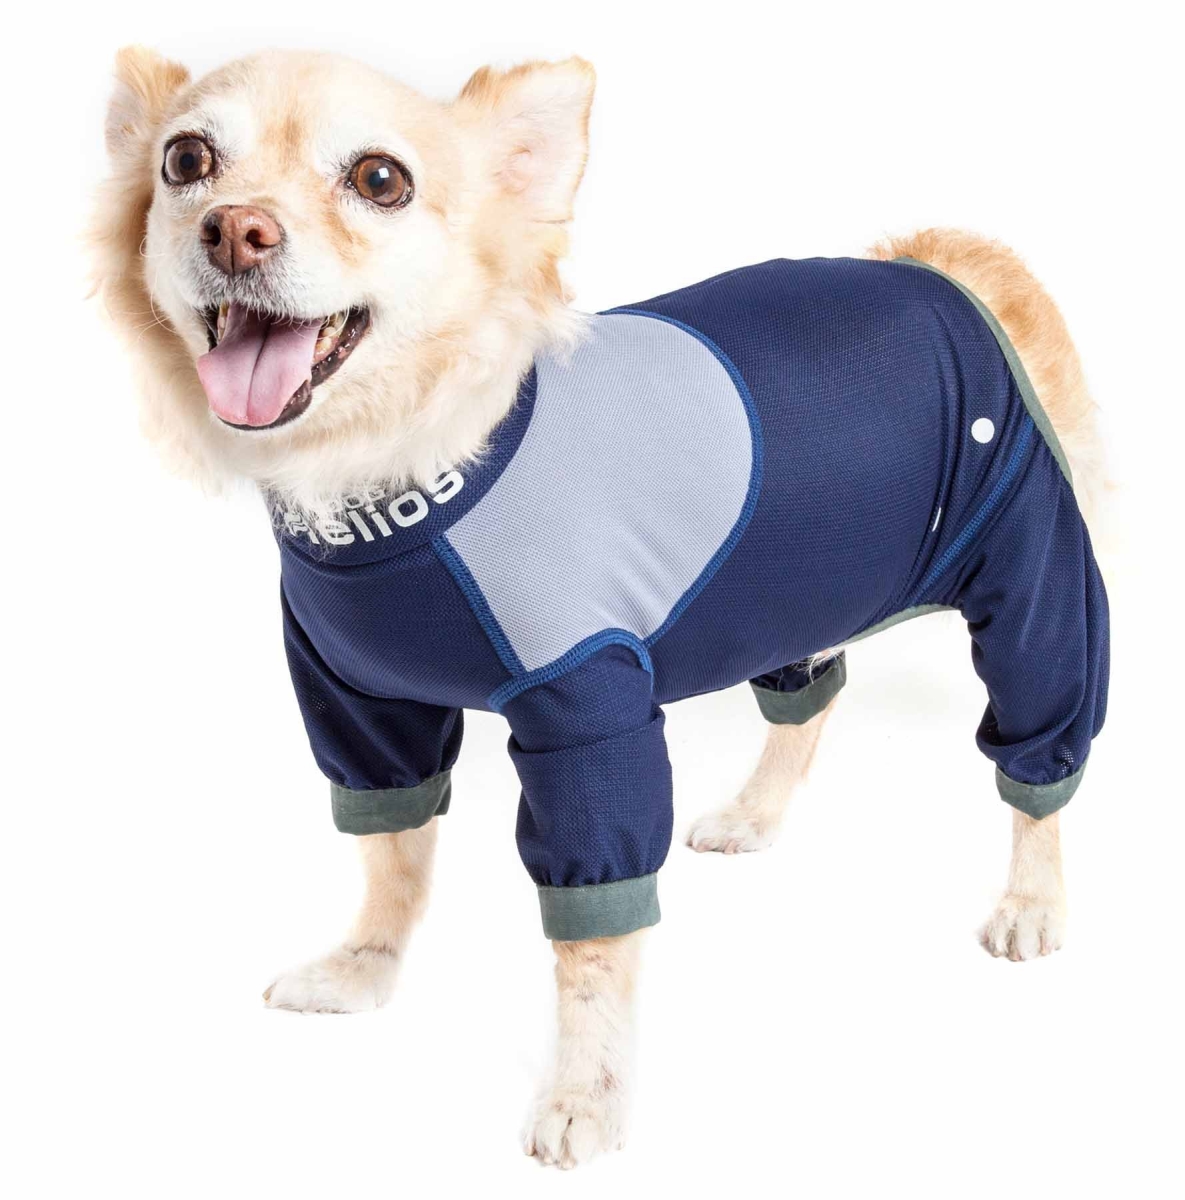 Yghl9blxl Tail Runner 4-way-stretch Breathable Full Bodied Performance Dog Track Suit - Blue & Grey, Extra Large